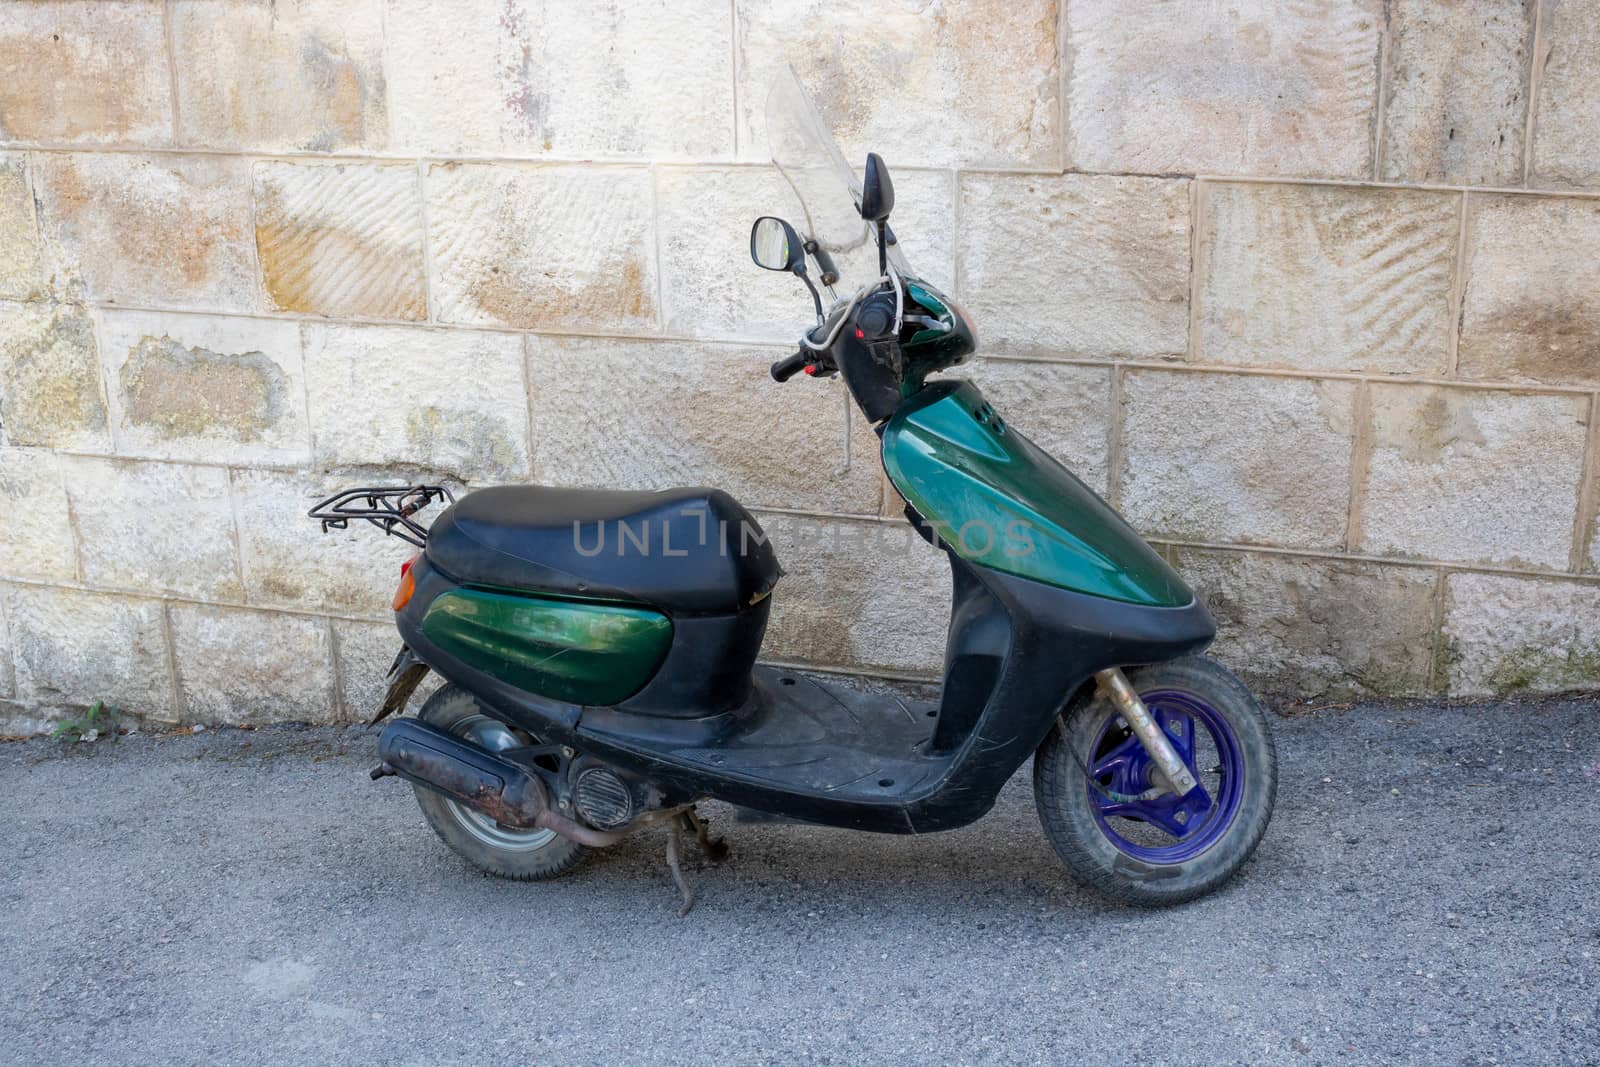 A green scooter is parked in an alley near a stone wall. Fast delivery by lapushka62